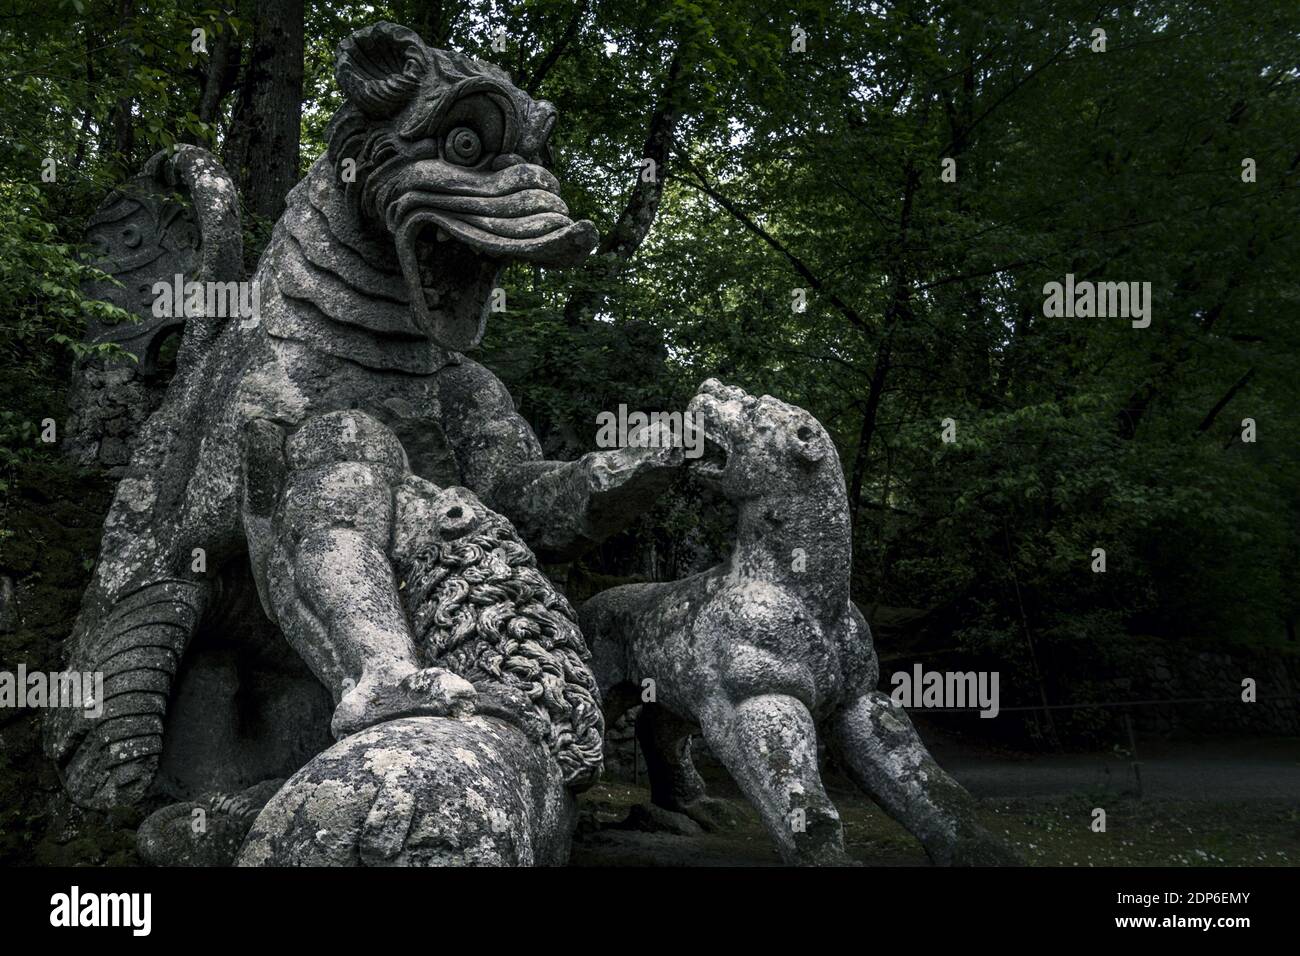 The large statue of the Dragon bitten by a lion and a wolf at the famous Gardens of Bomarzo, Viterbo Stock Photo